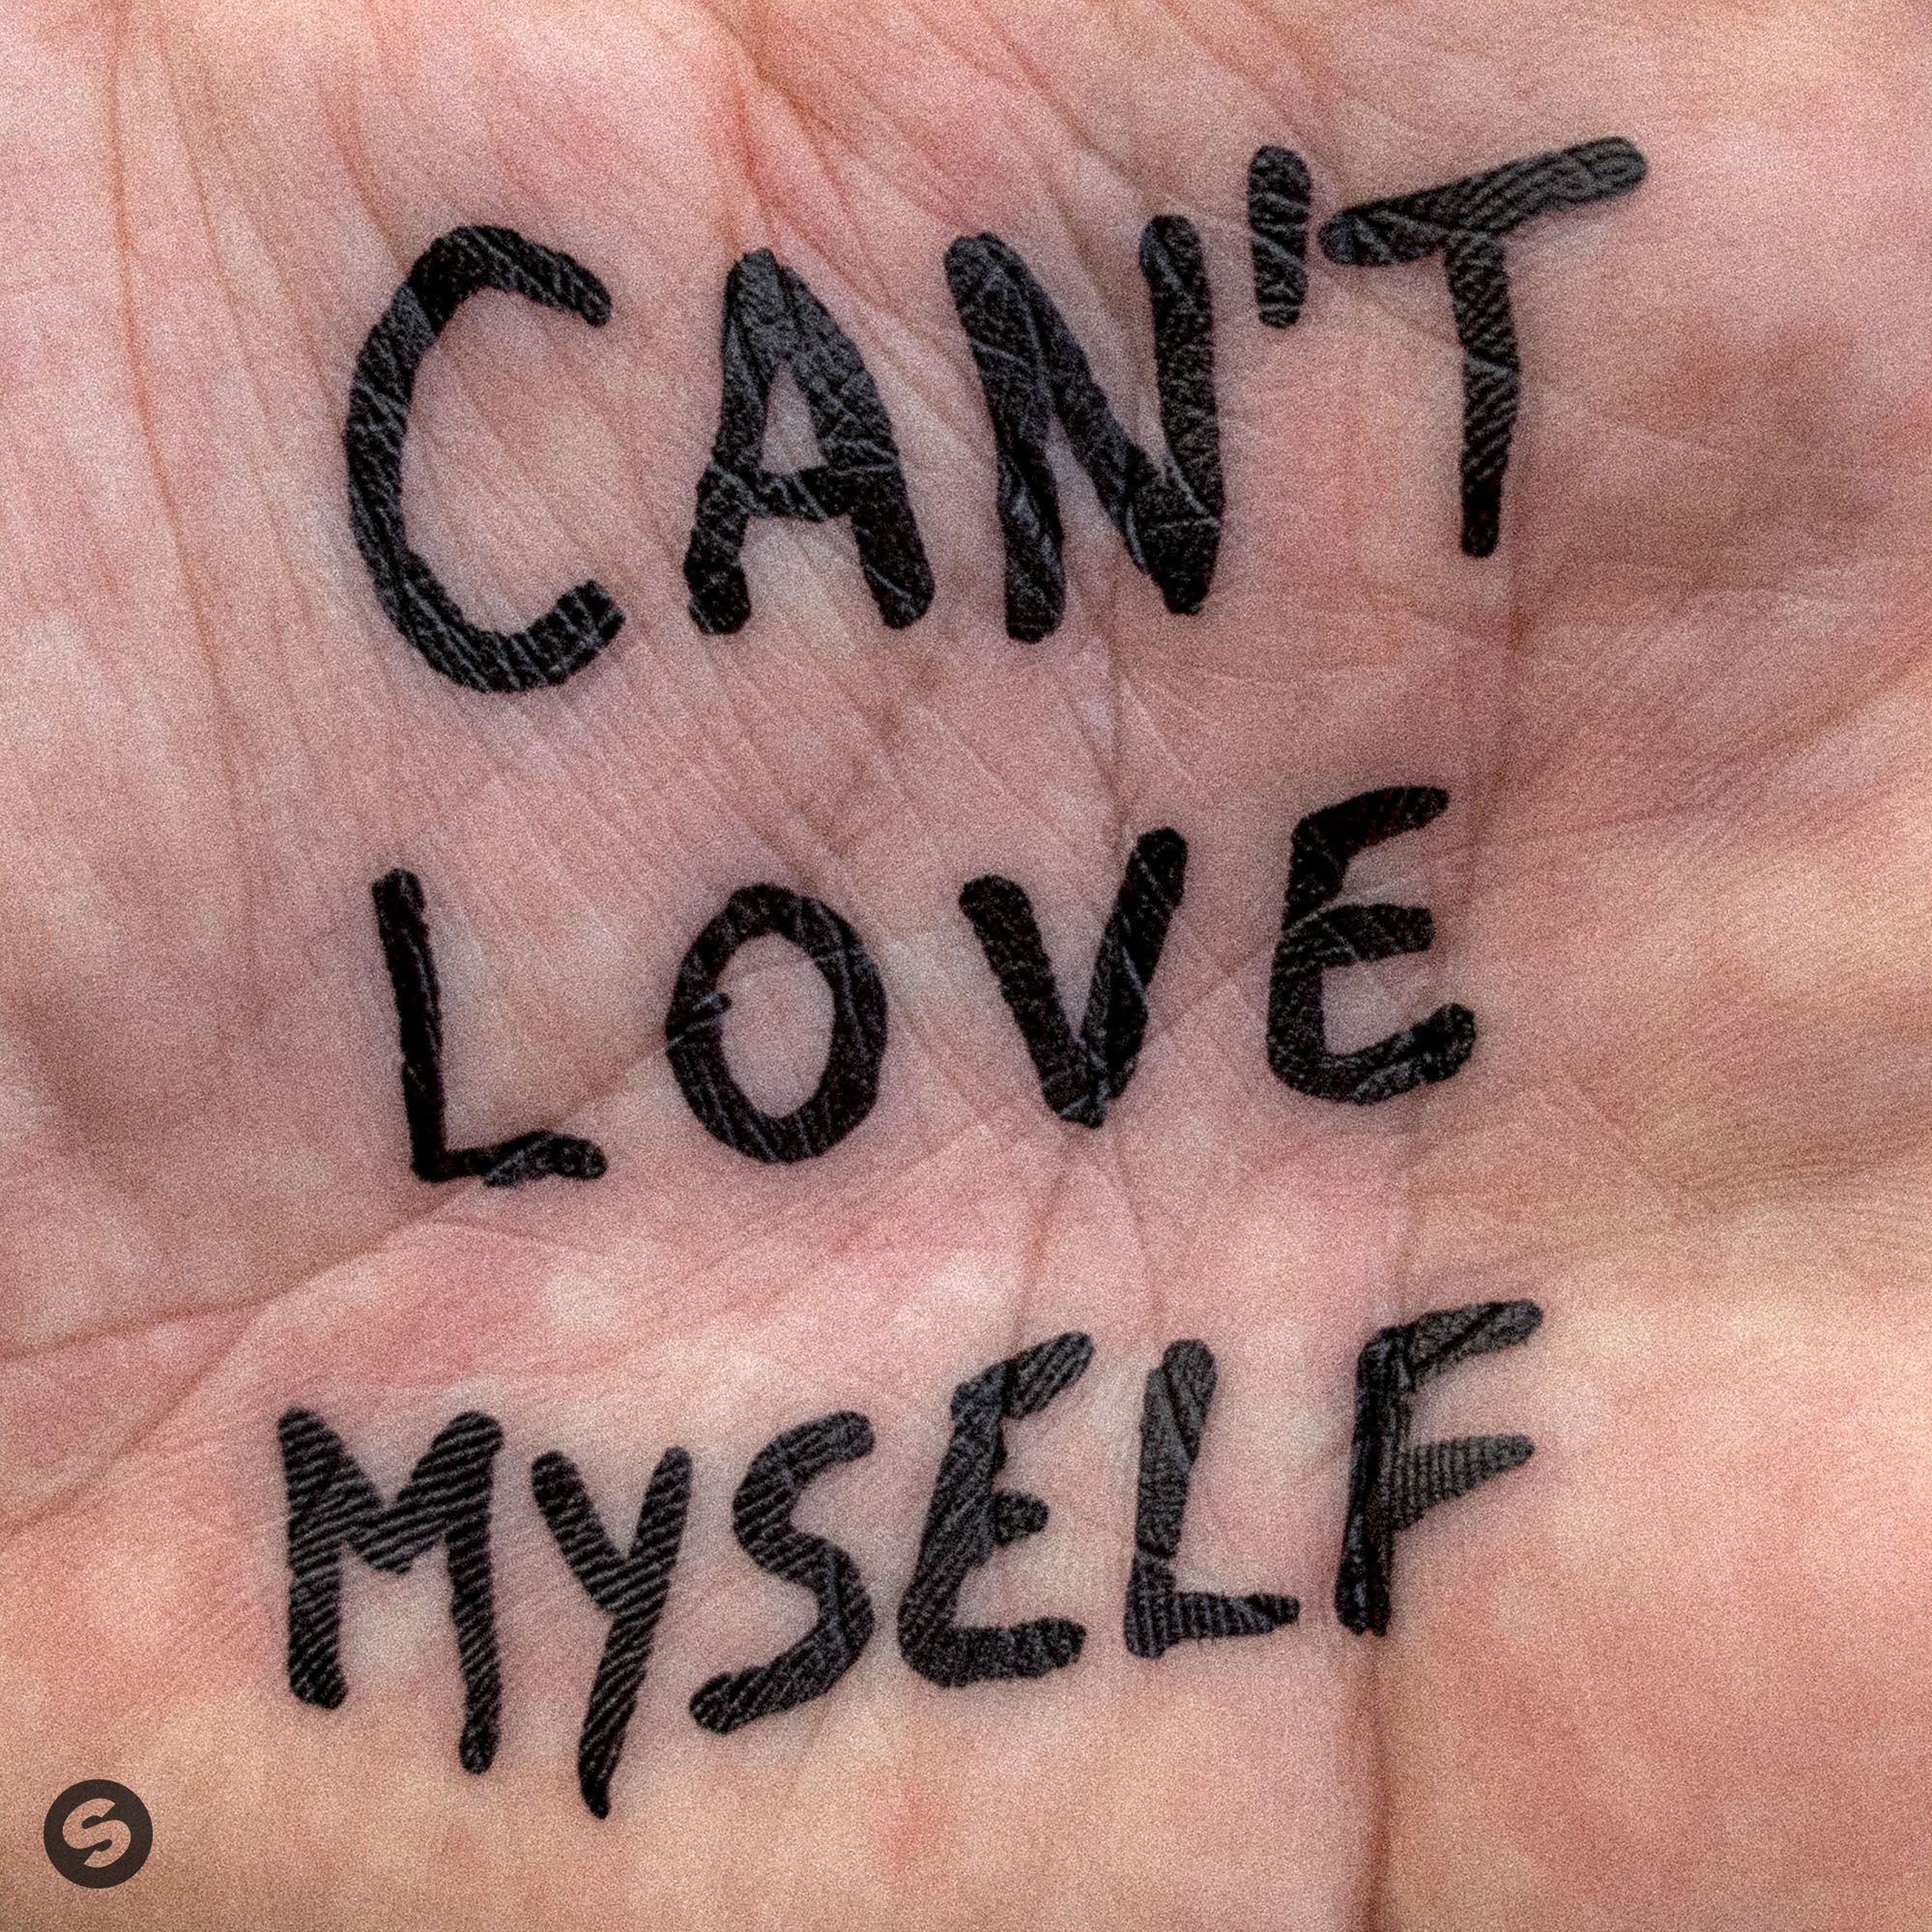 Cant help loving. Cant Love. Monty Datta can't Love myself. How can i Love myself. I Love you myself.